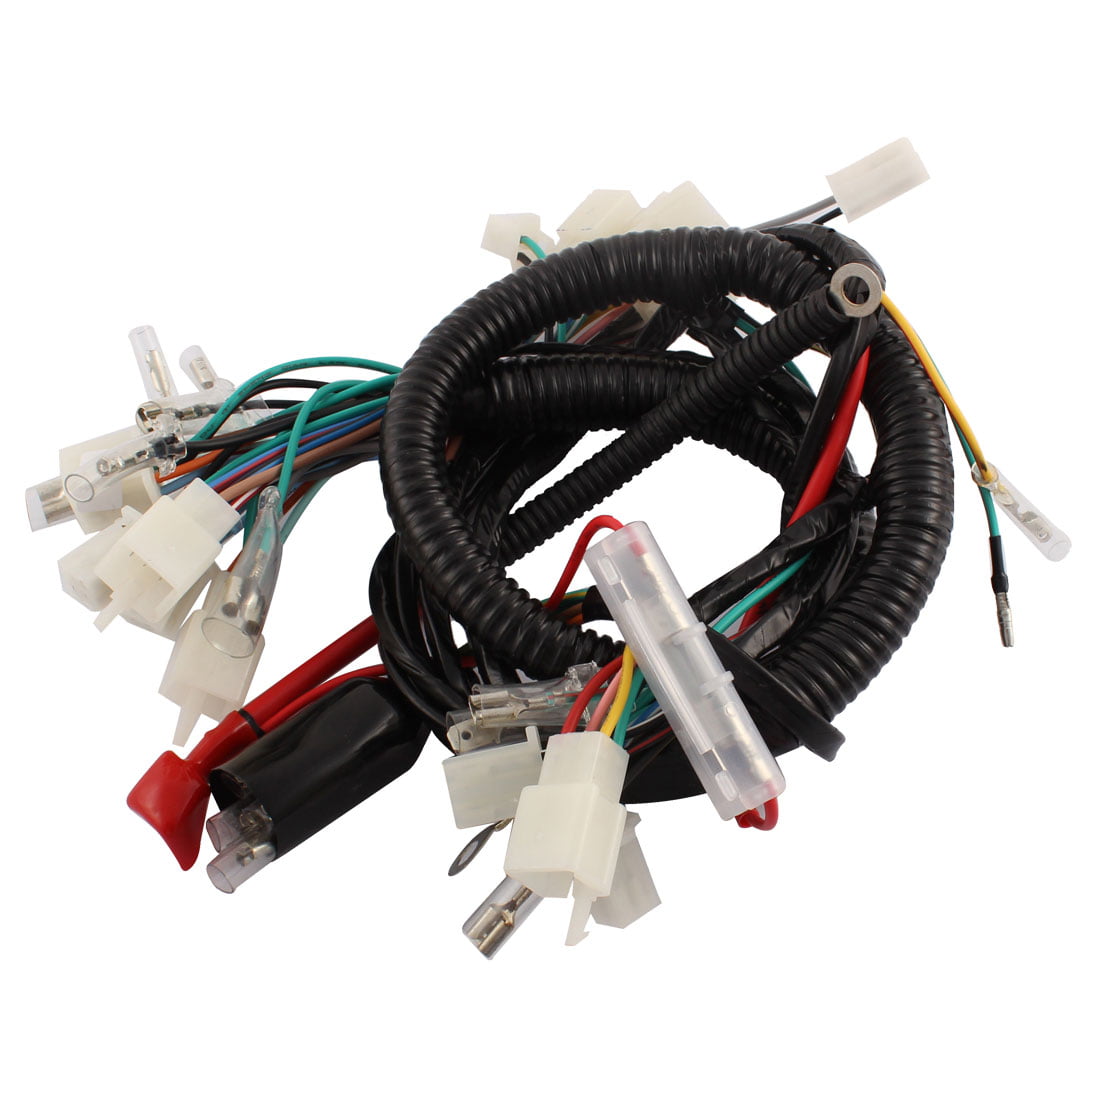 Unique Bargains Motorcycle Ultima Complete System Electrical Main Wiring  Harness for CG125 - Walmart.com Harley Generator Wiring Diagram Walmart.com